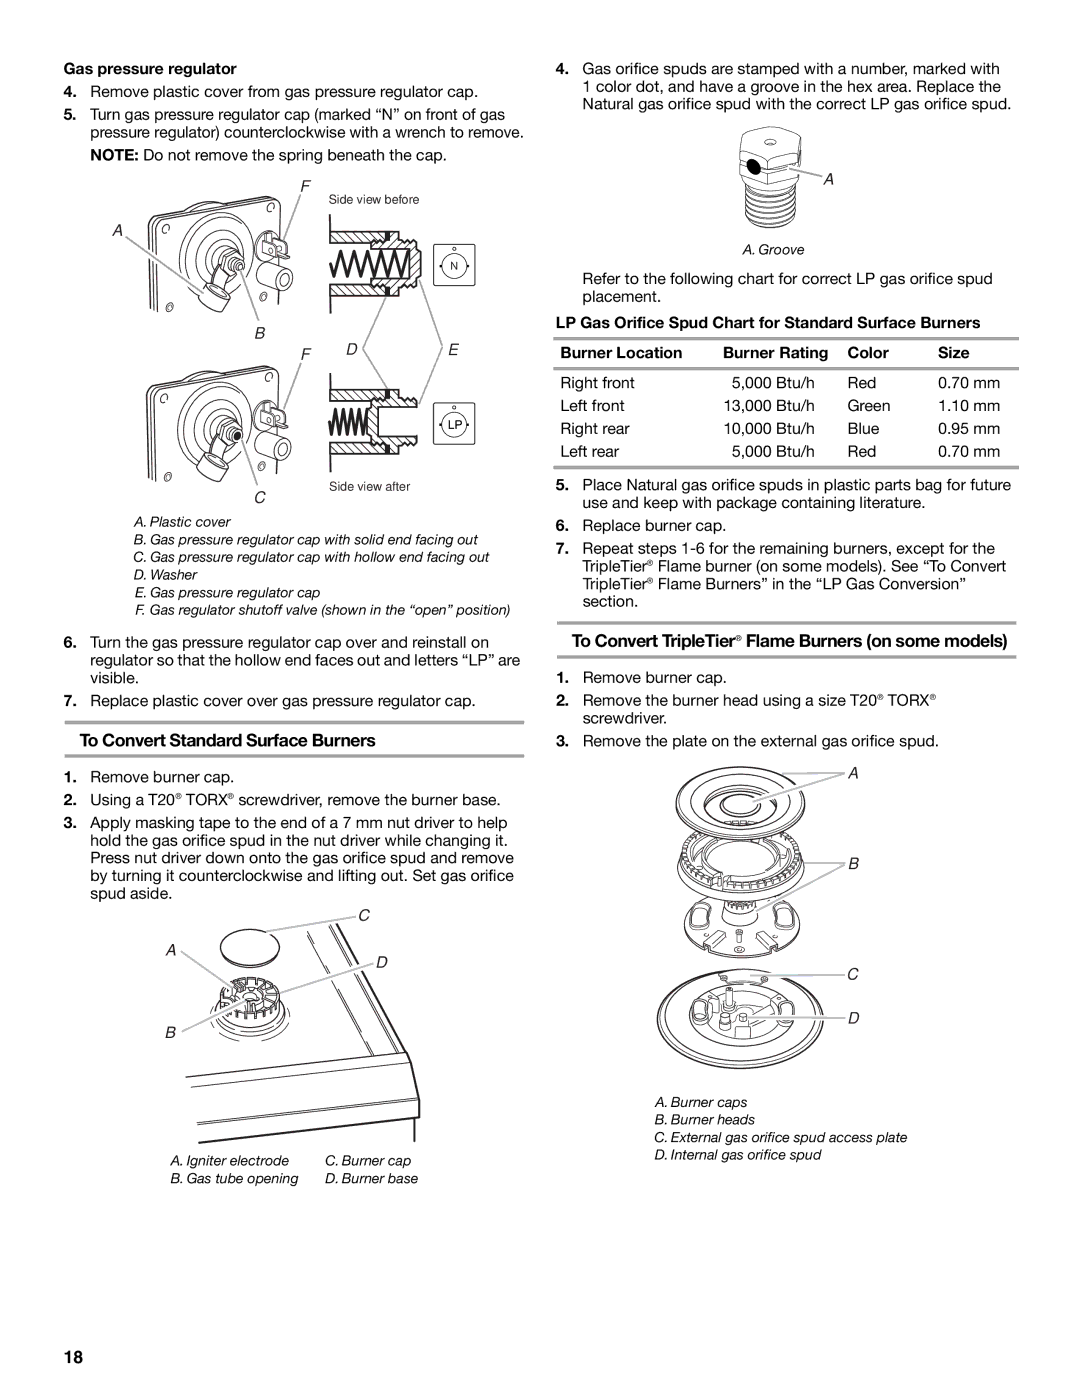 KitchenAid W10526089A To Convert Standard Surface Burners, To Convert TripleTier Flame Burners on some models 